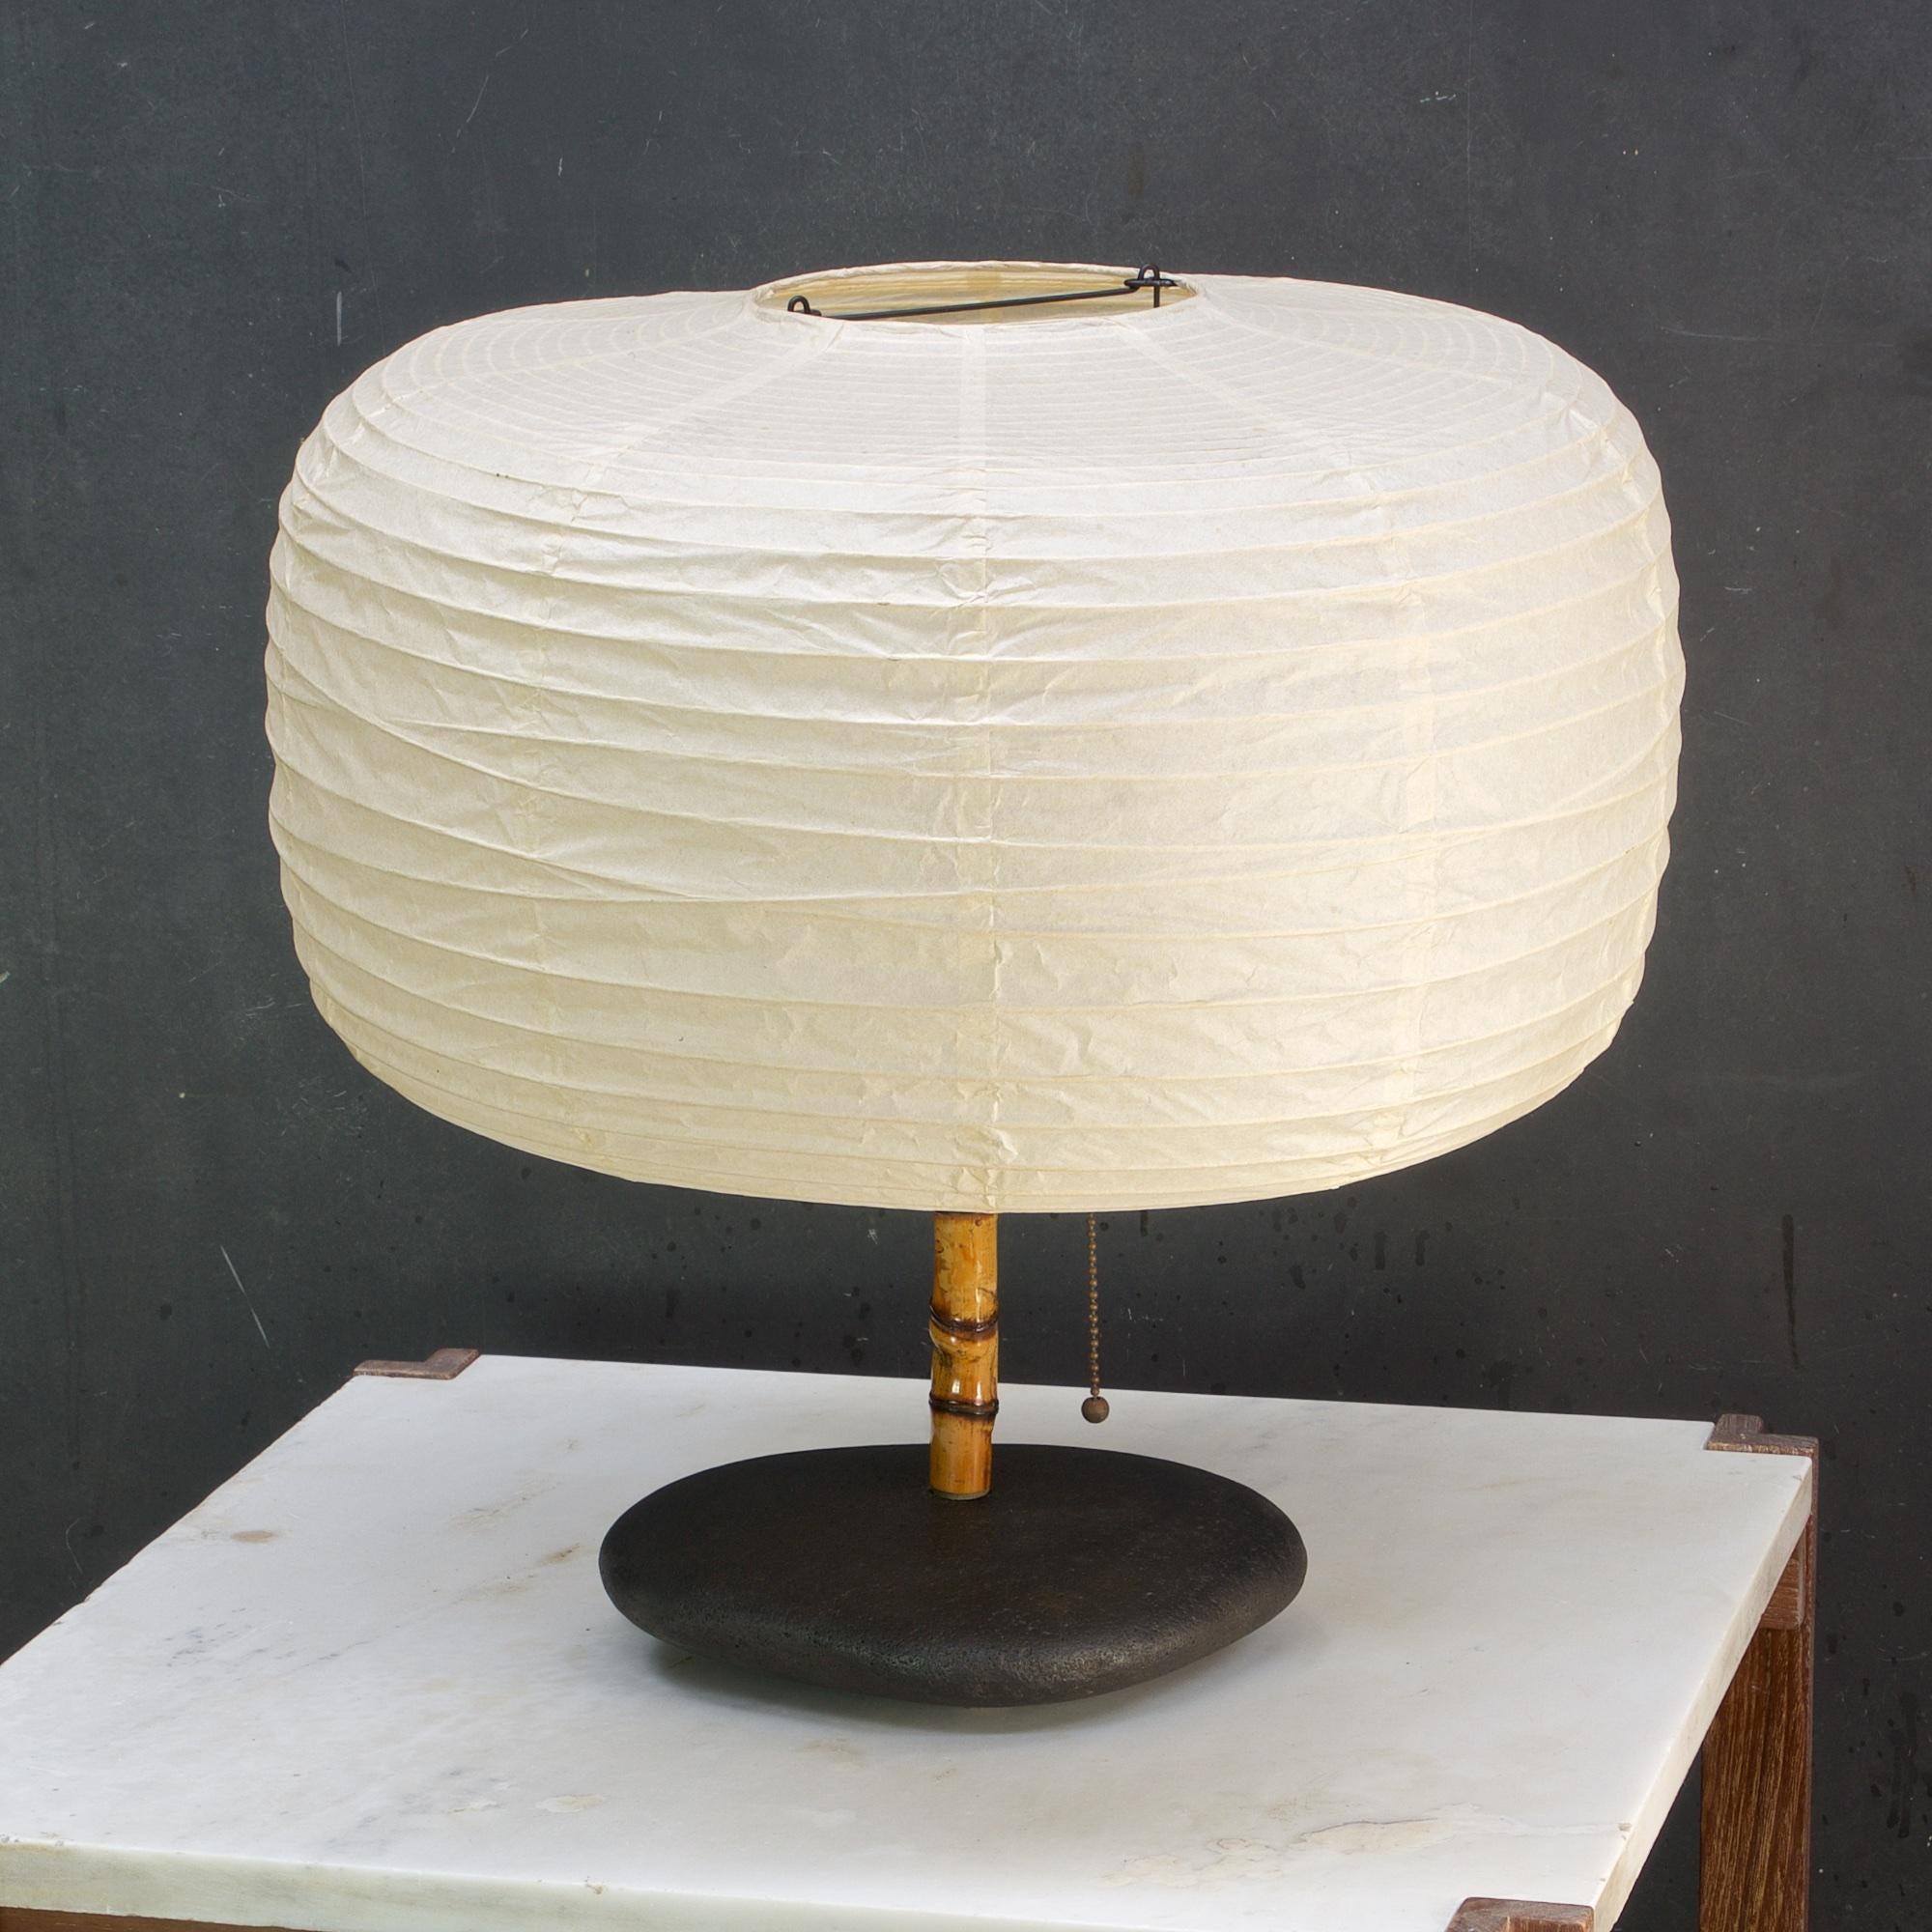 Wonderful new 2018 assemblage made of vintage materials. A Modern50 studio made table lamp with an Asian and Mid-Century presence. 

Lamp rock base is 9.5 x 7.5 in.
